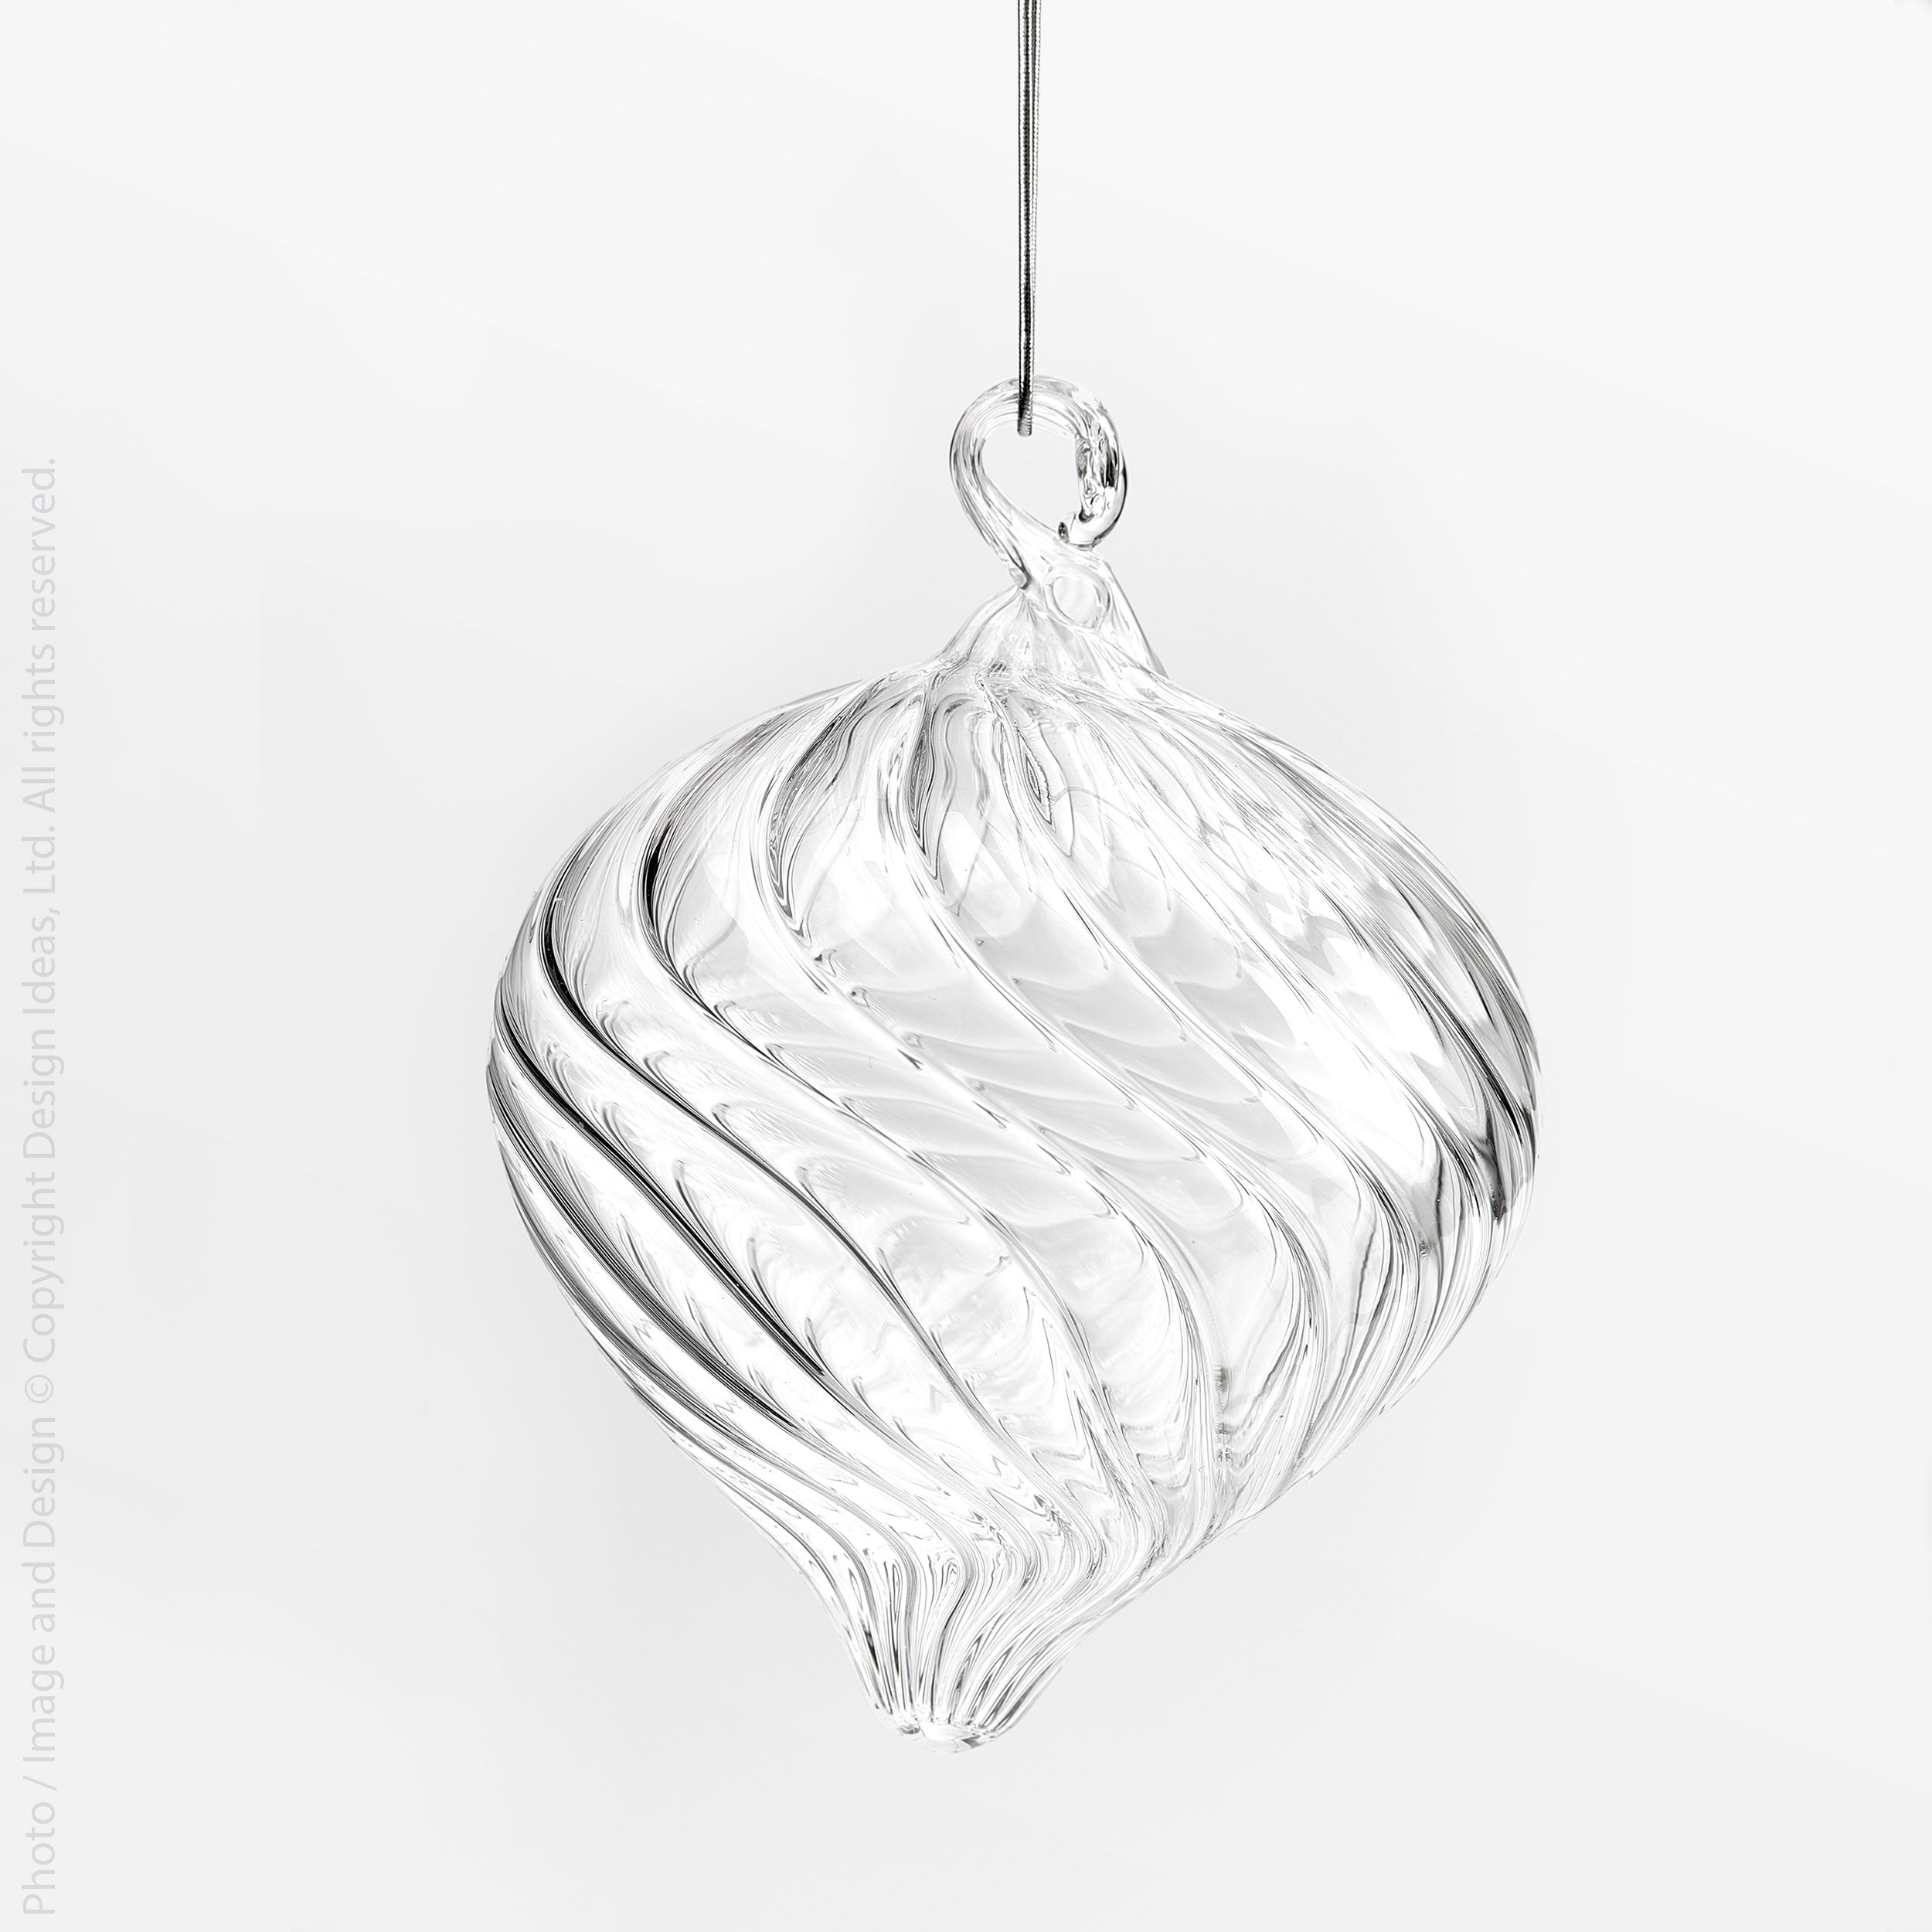 Tullen™ Mouth Blown Glass ornament (4 in)